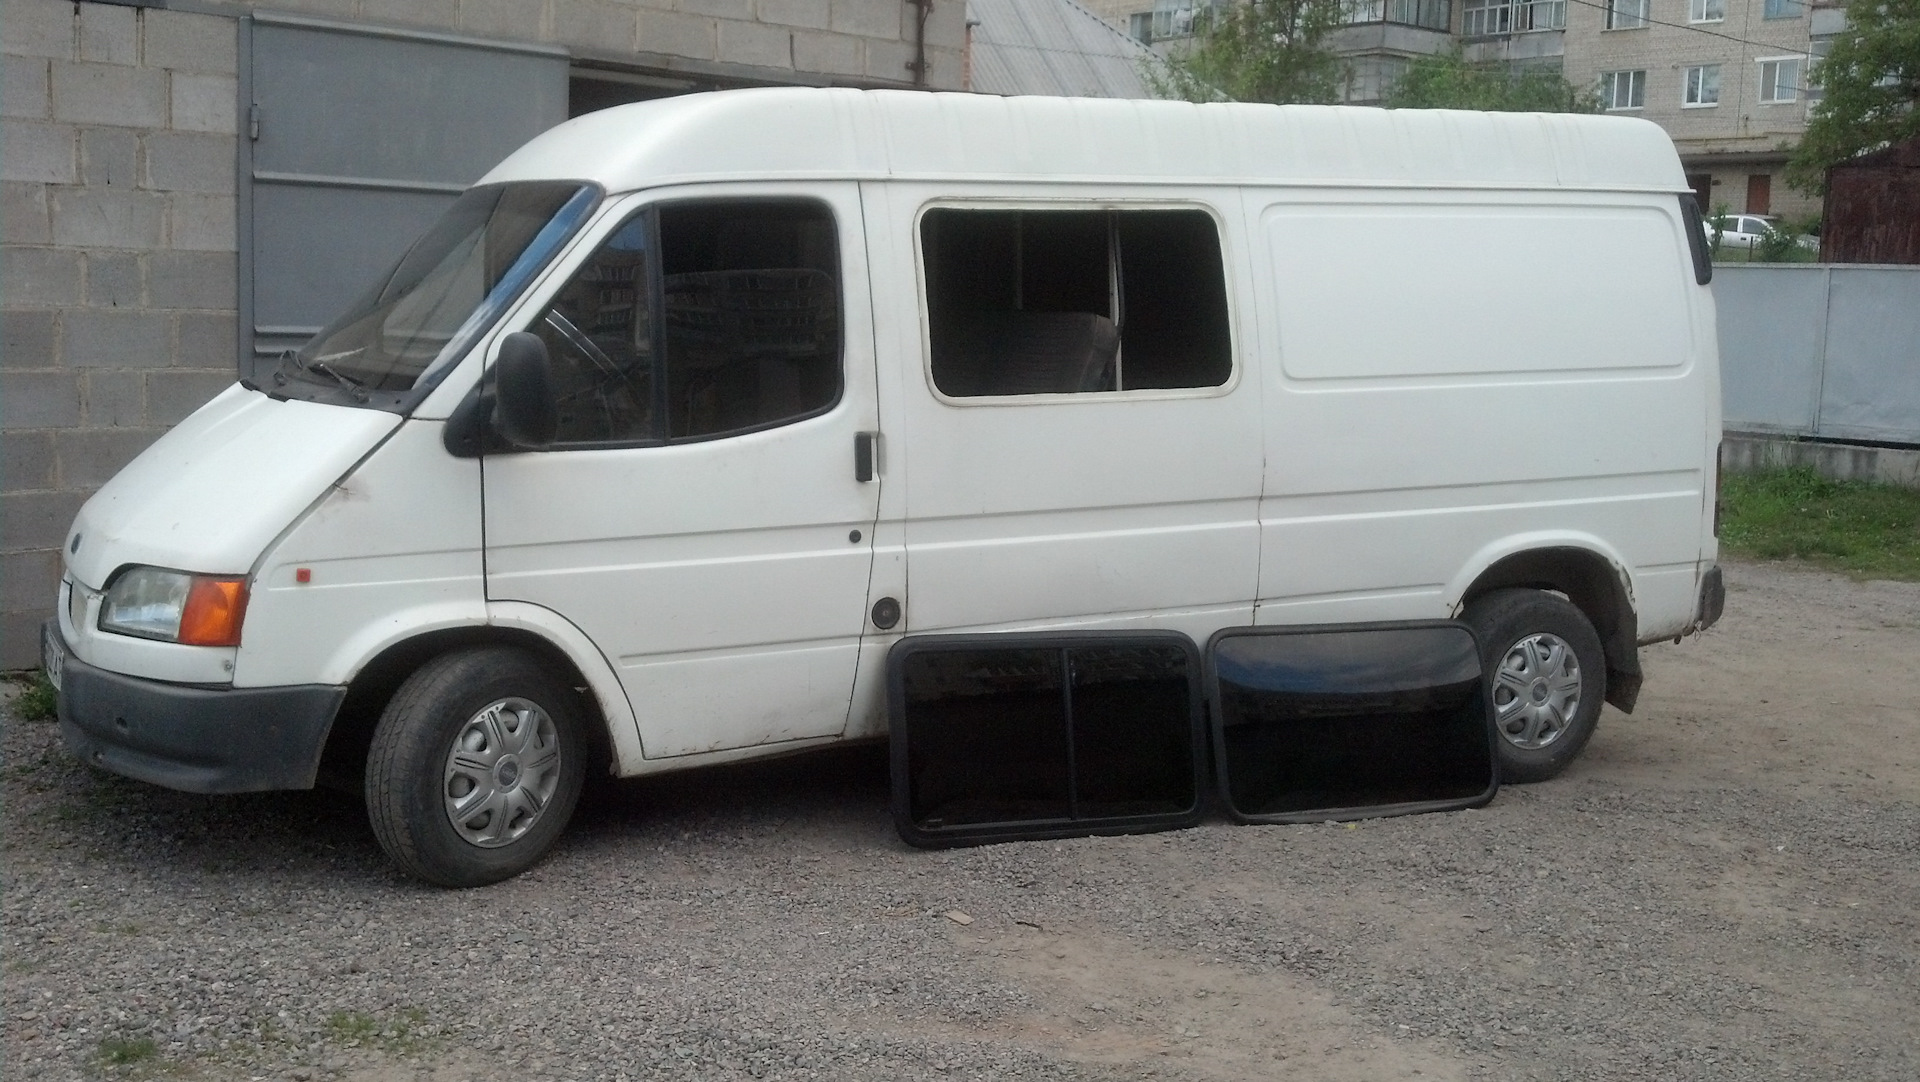 Транзит 98 года. Ford Transit 4g. Ford Transit 1999. Ford Transit 2.5. Ford Transit 1999 длинный.